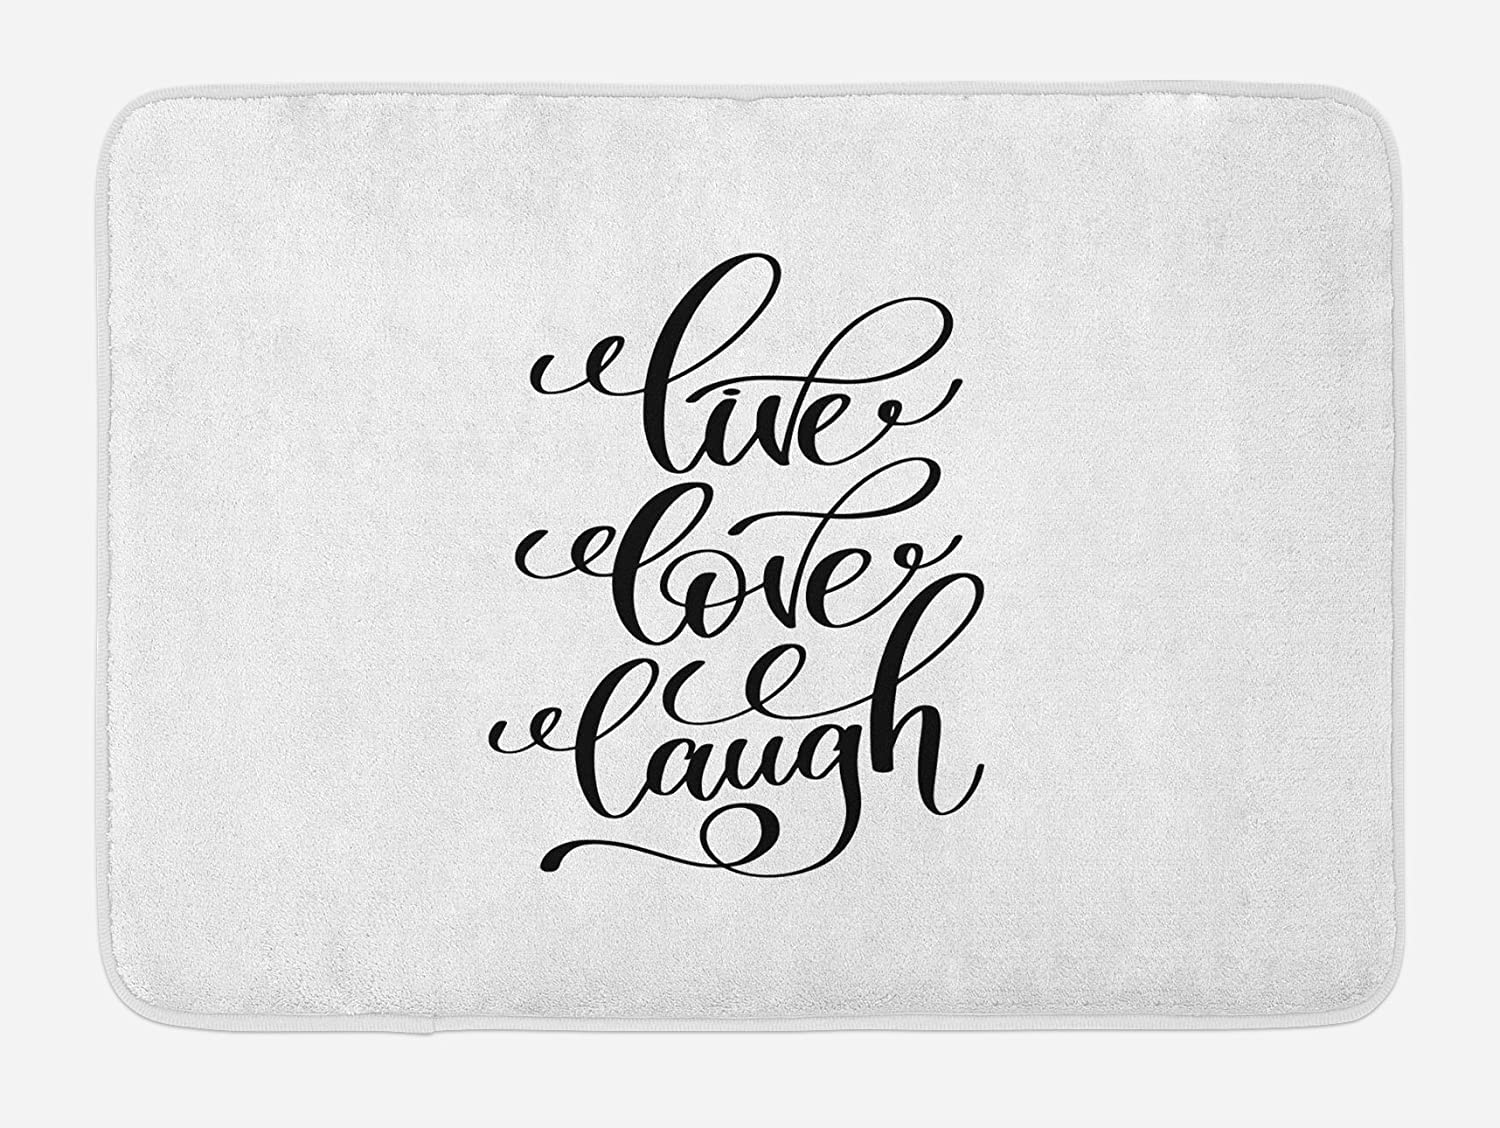 Nichpedr Live Laugh Love Hand Lettering Style Live Laugh Love Words Monochrome Design Entrance Way Rugs Doormats Soft Non-Slip Washable Bath Rugs Floor Mats for Home Bathroom Kitchen 16x24 Inch